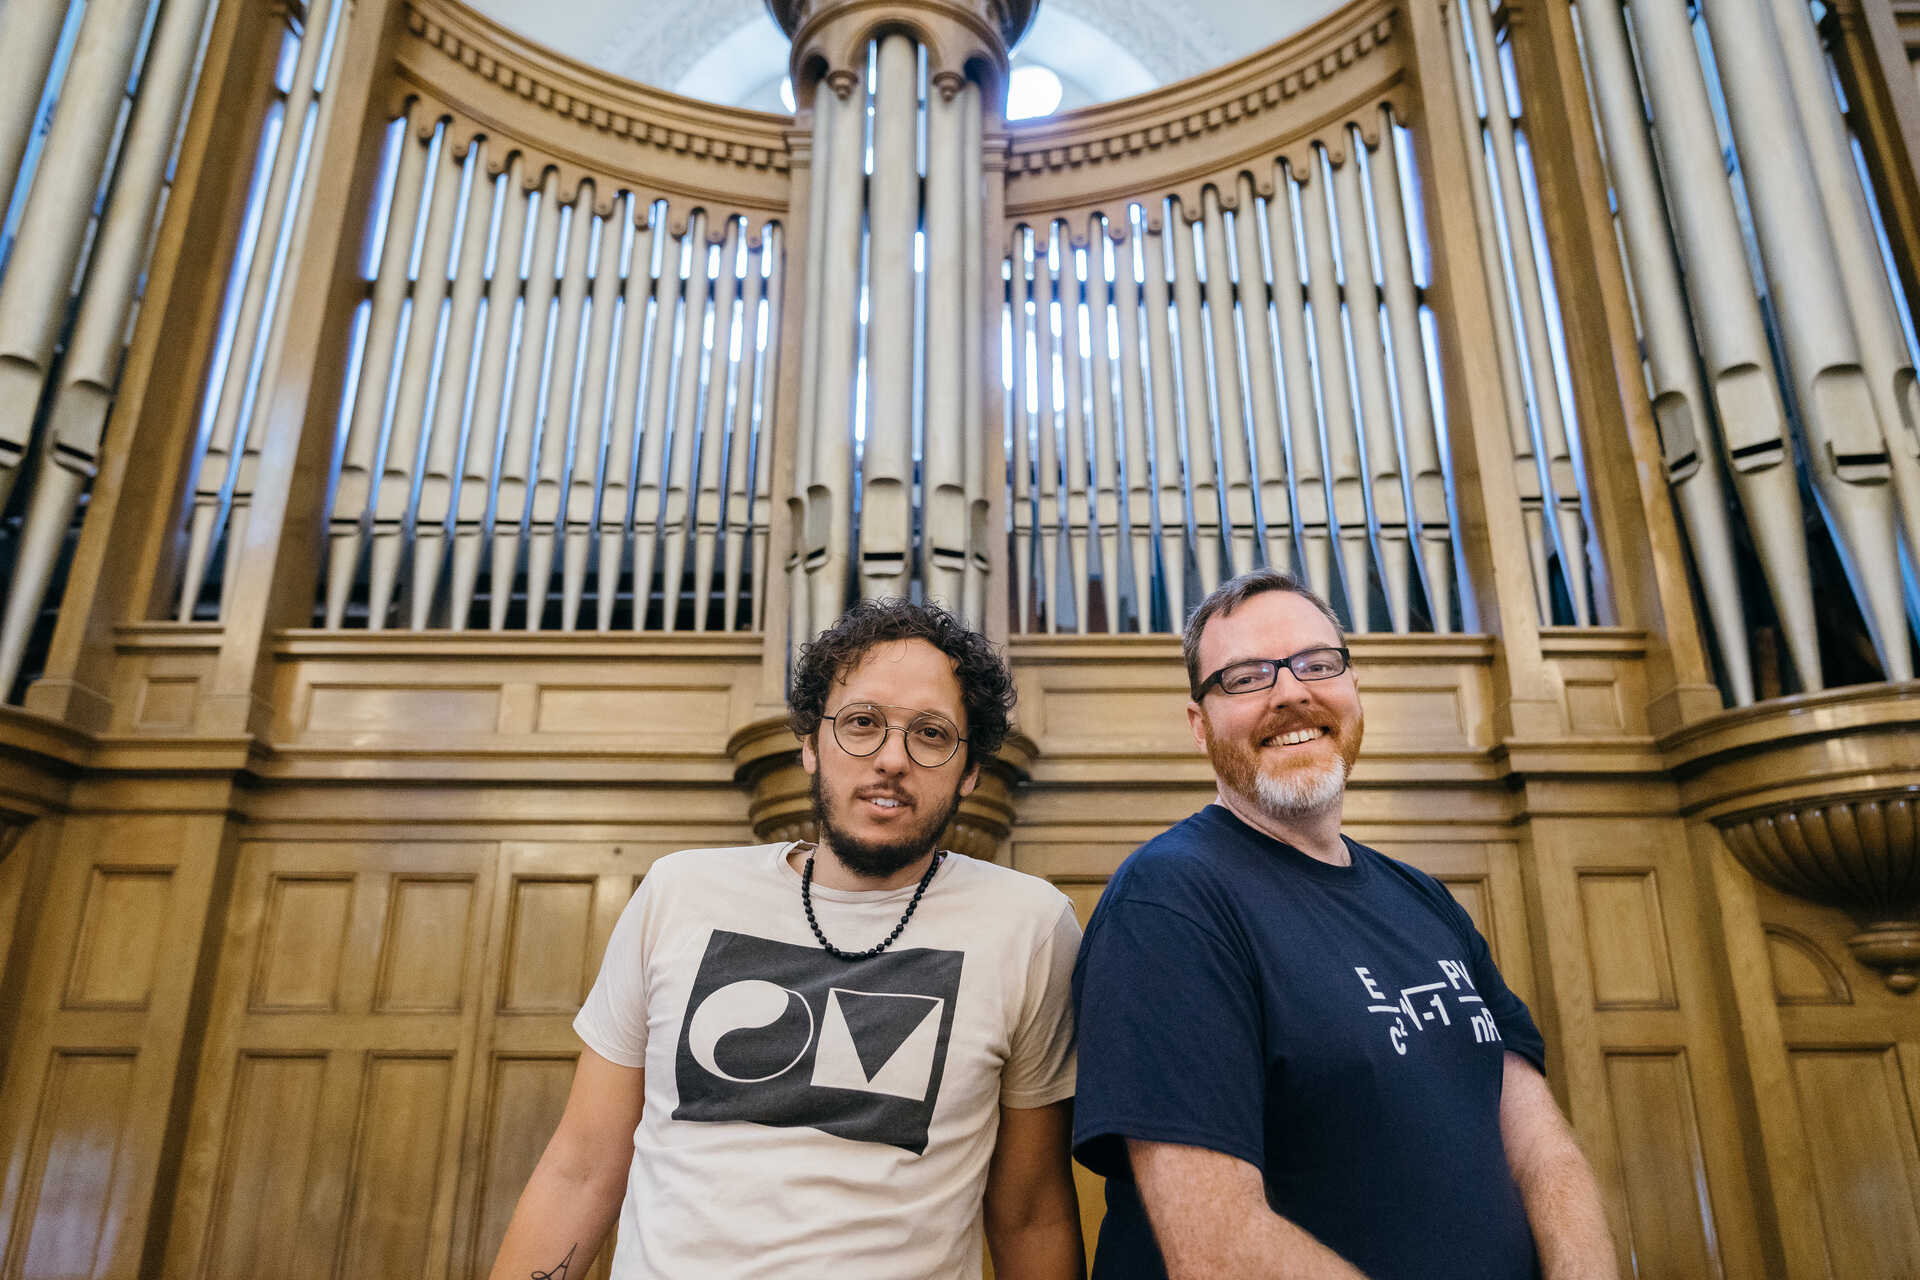 Portrait of The Liturgists, Michael Gungor and Science Mike Mchargue